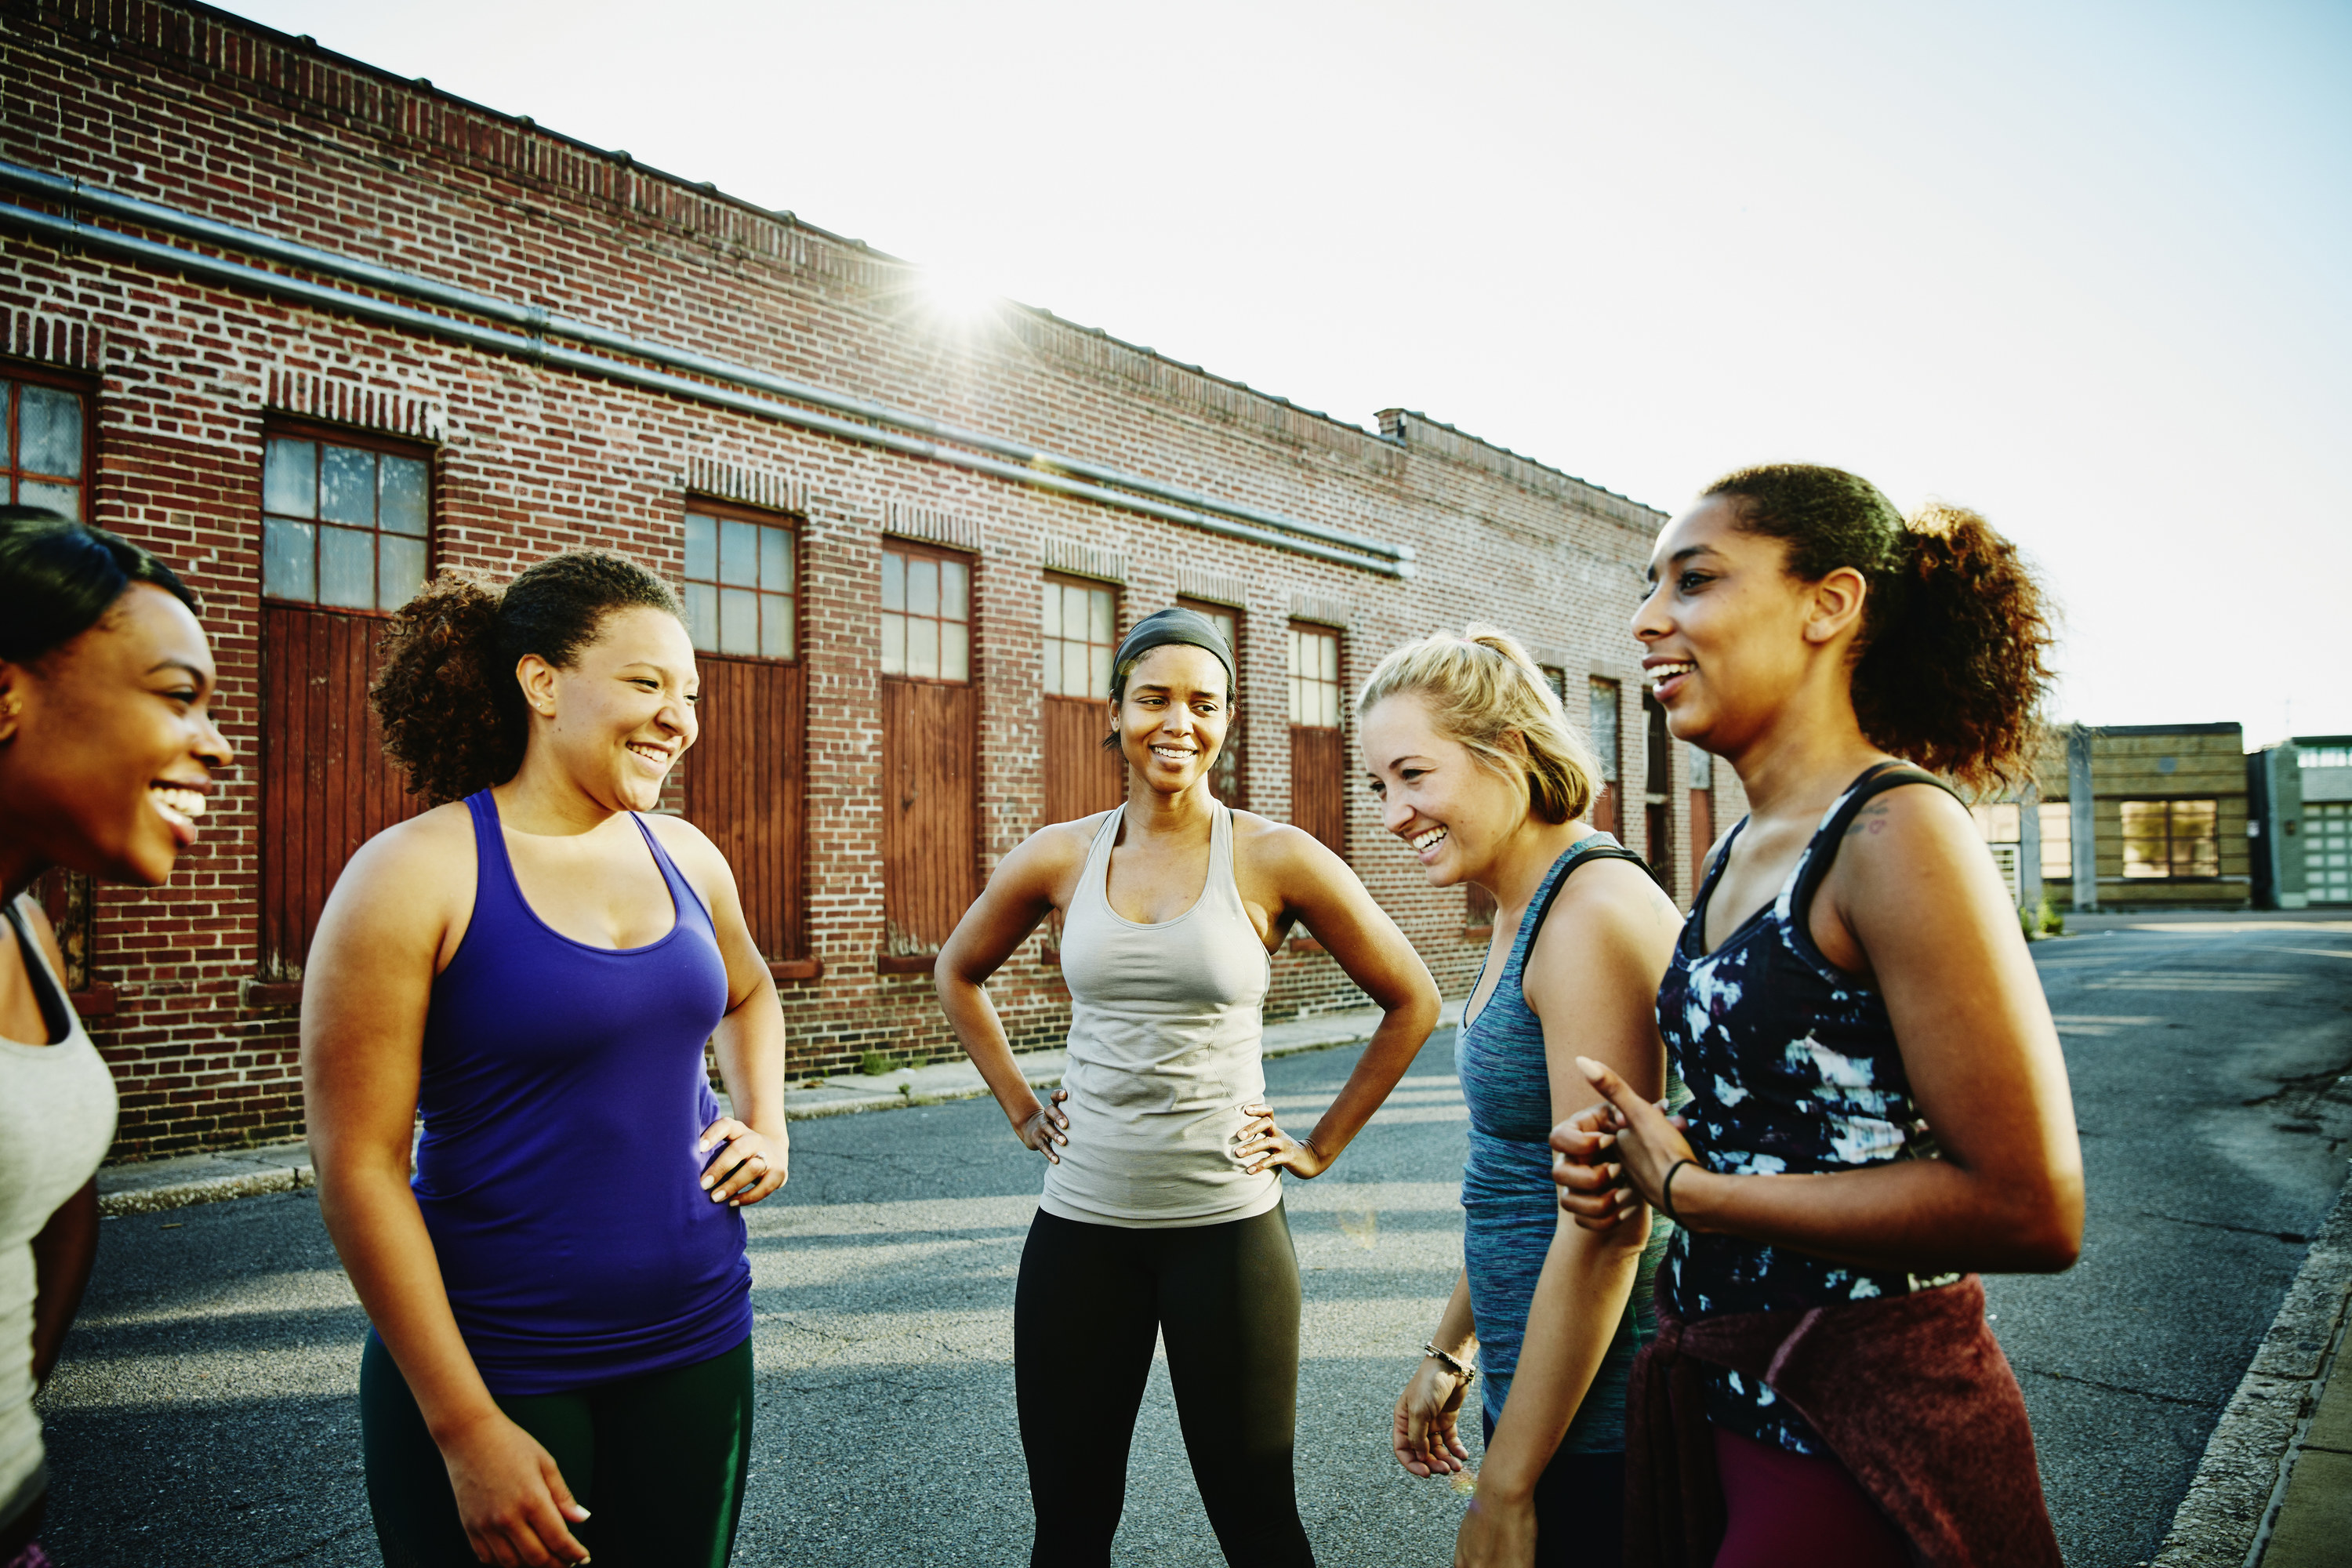 A group of women smile as they get ready to run